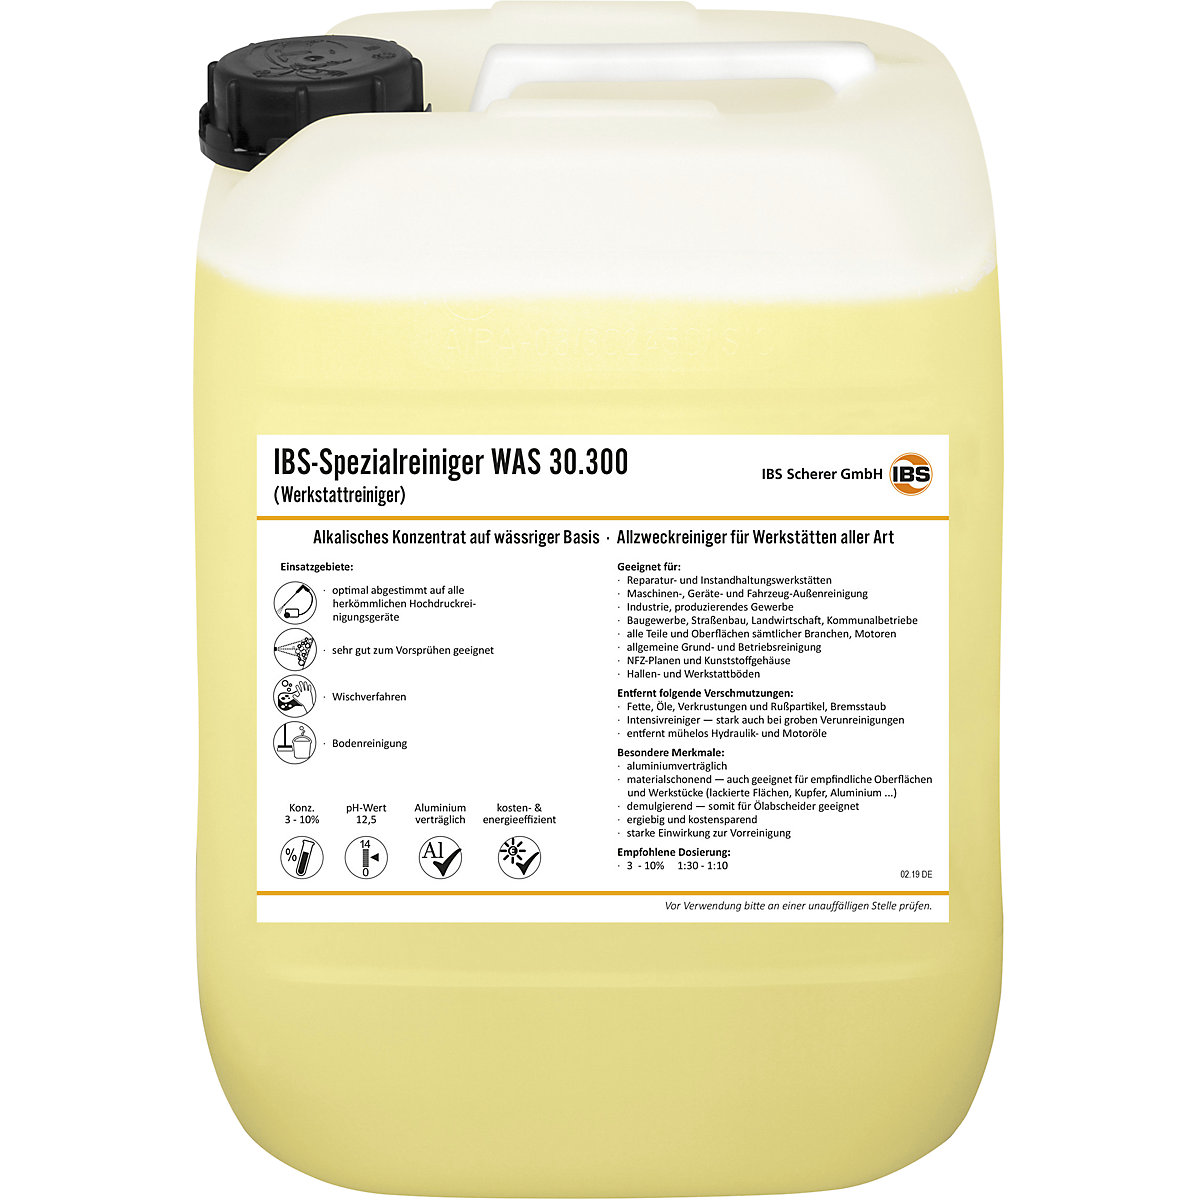 All-purpose cleaner for the workshop – IBS Scherer